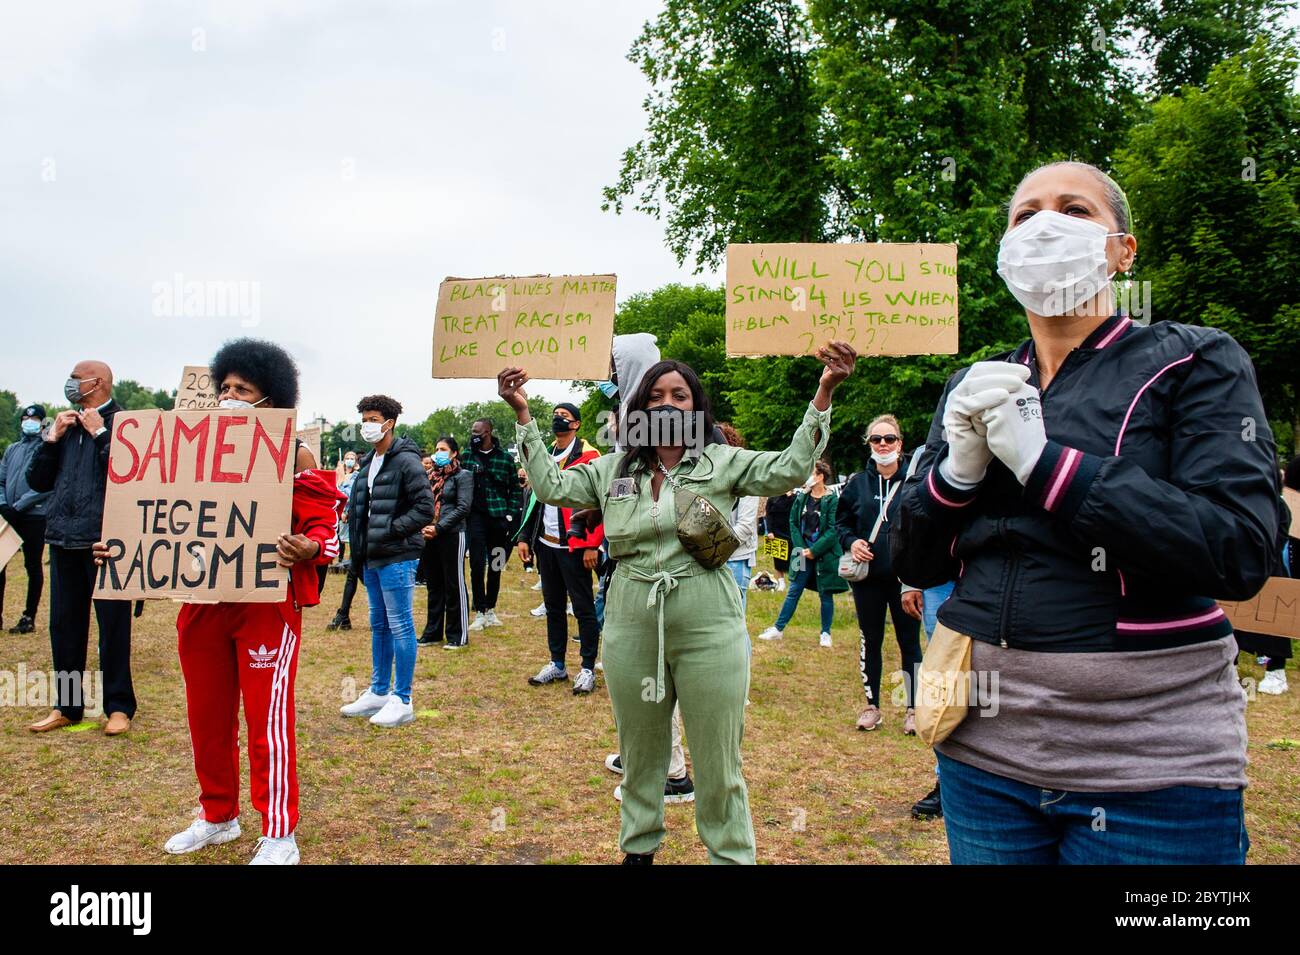 Protesters holding placards during the demonstration.Thousands of people gathered at the Nelson Mandela Park to protest against police brutality and racism which is an initiative of residents of the Bijlmer district, the largest population of Afro-Dutch people in Amsterdam. The black community has been a victim of oppression for decades since the 1990s. Stock Photo